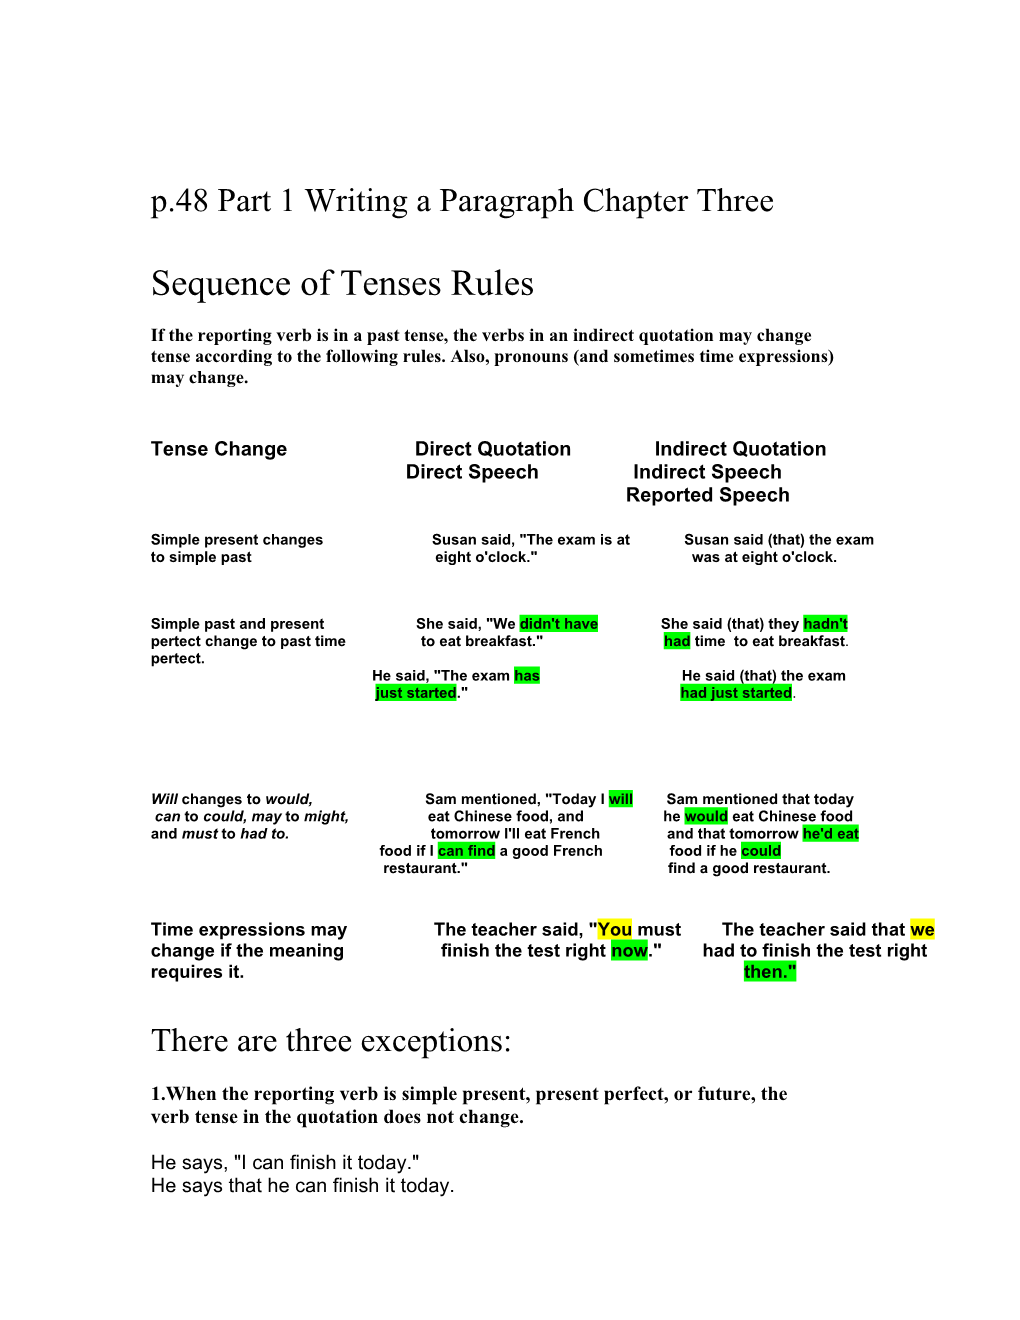 P.48 Part 1 Writing a Paragraph Chapter Three